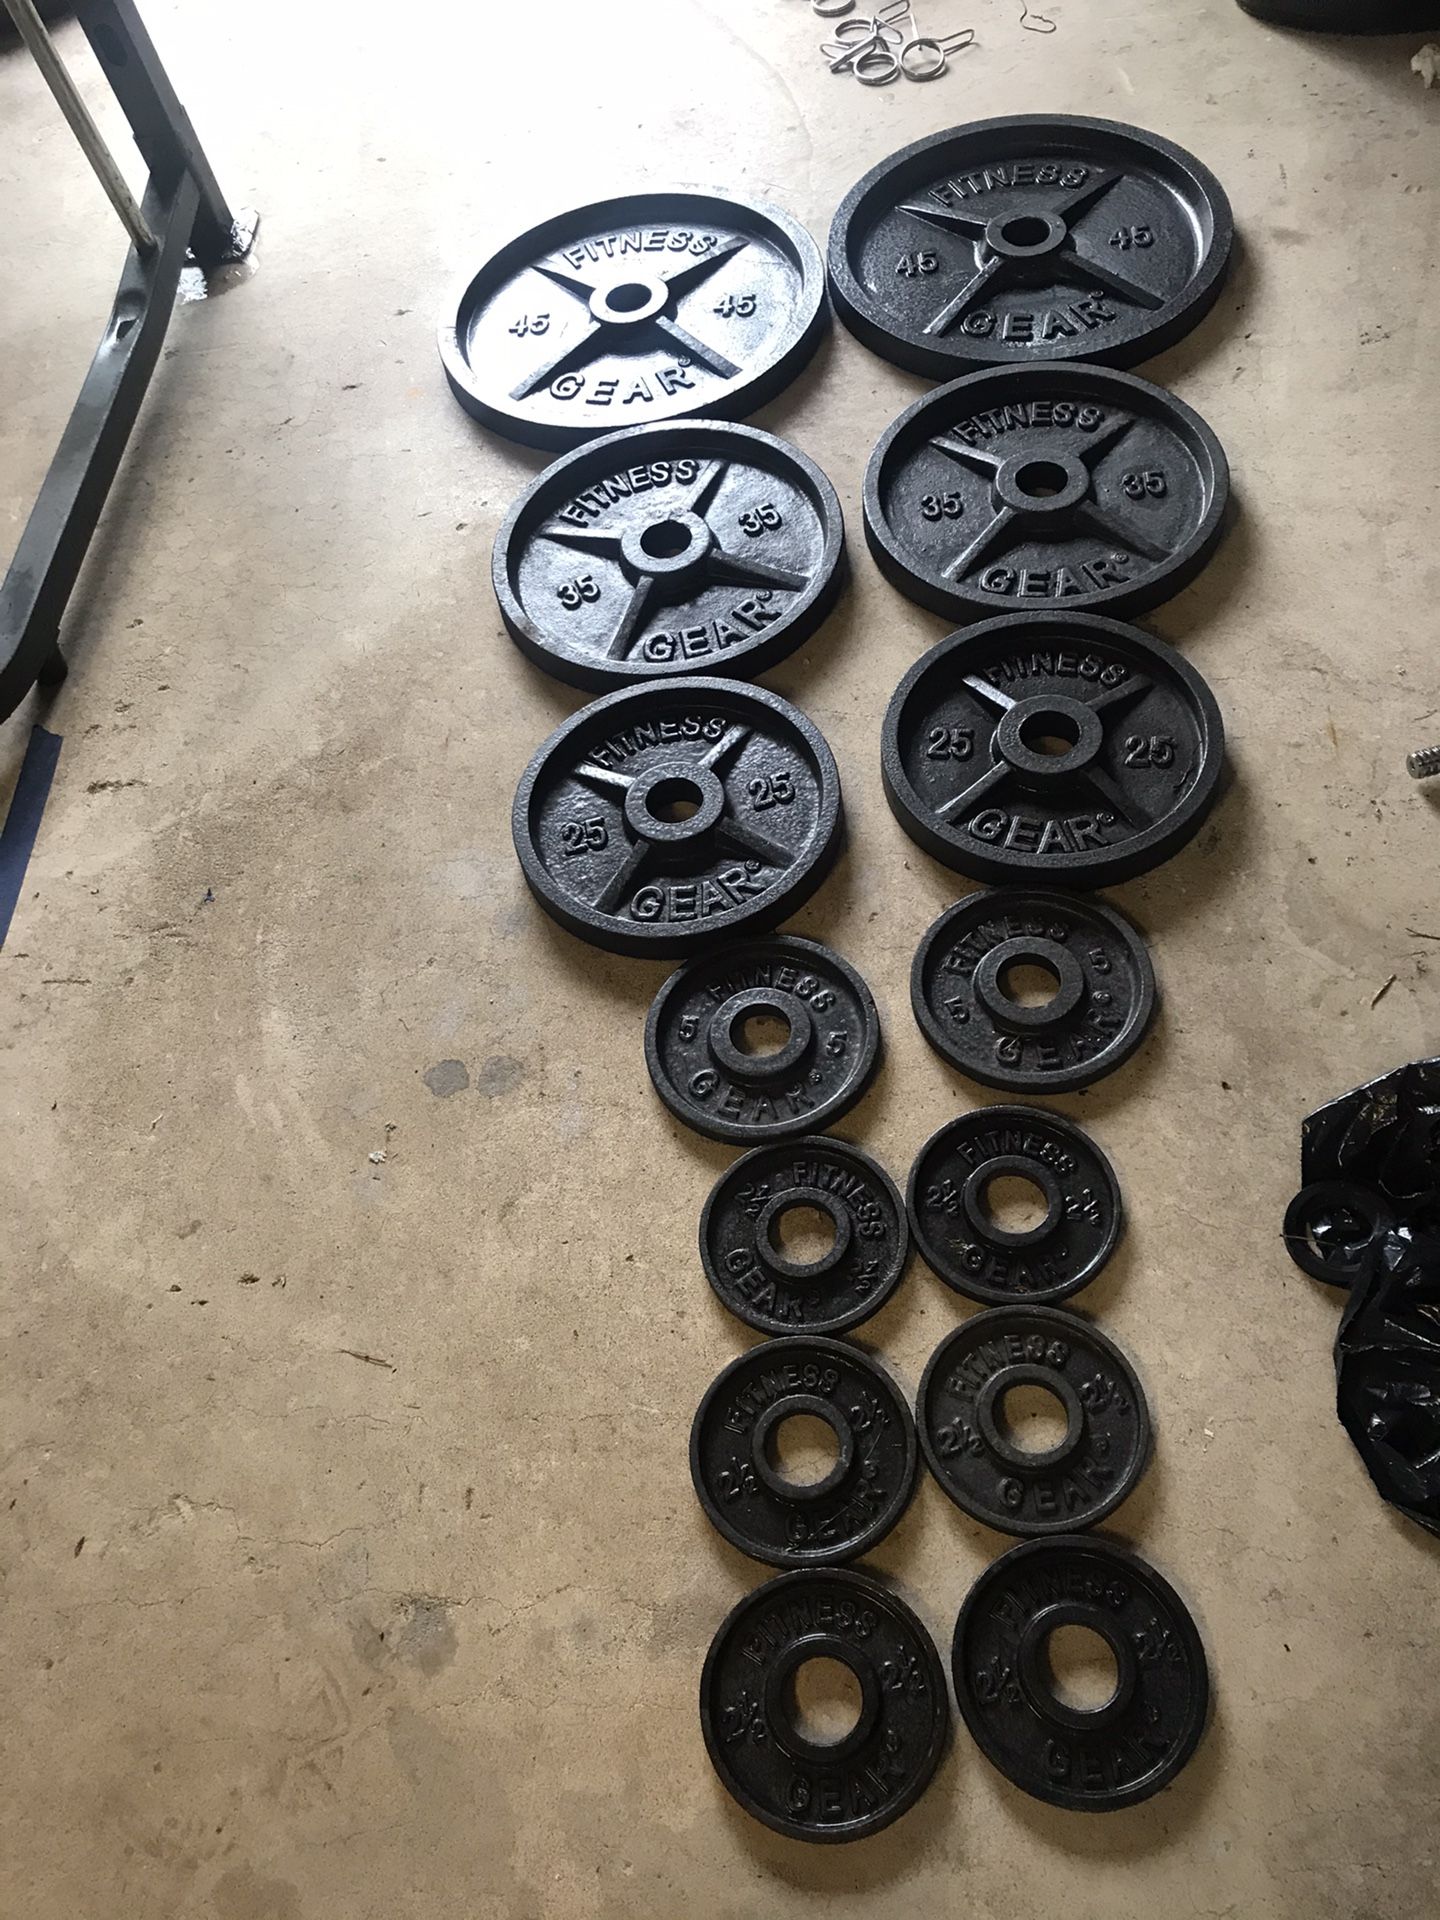 Set of 235 Lbs Olympic weights plates